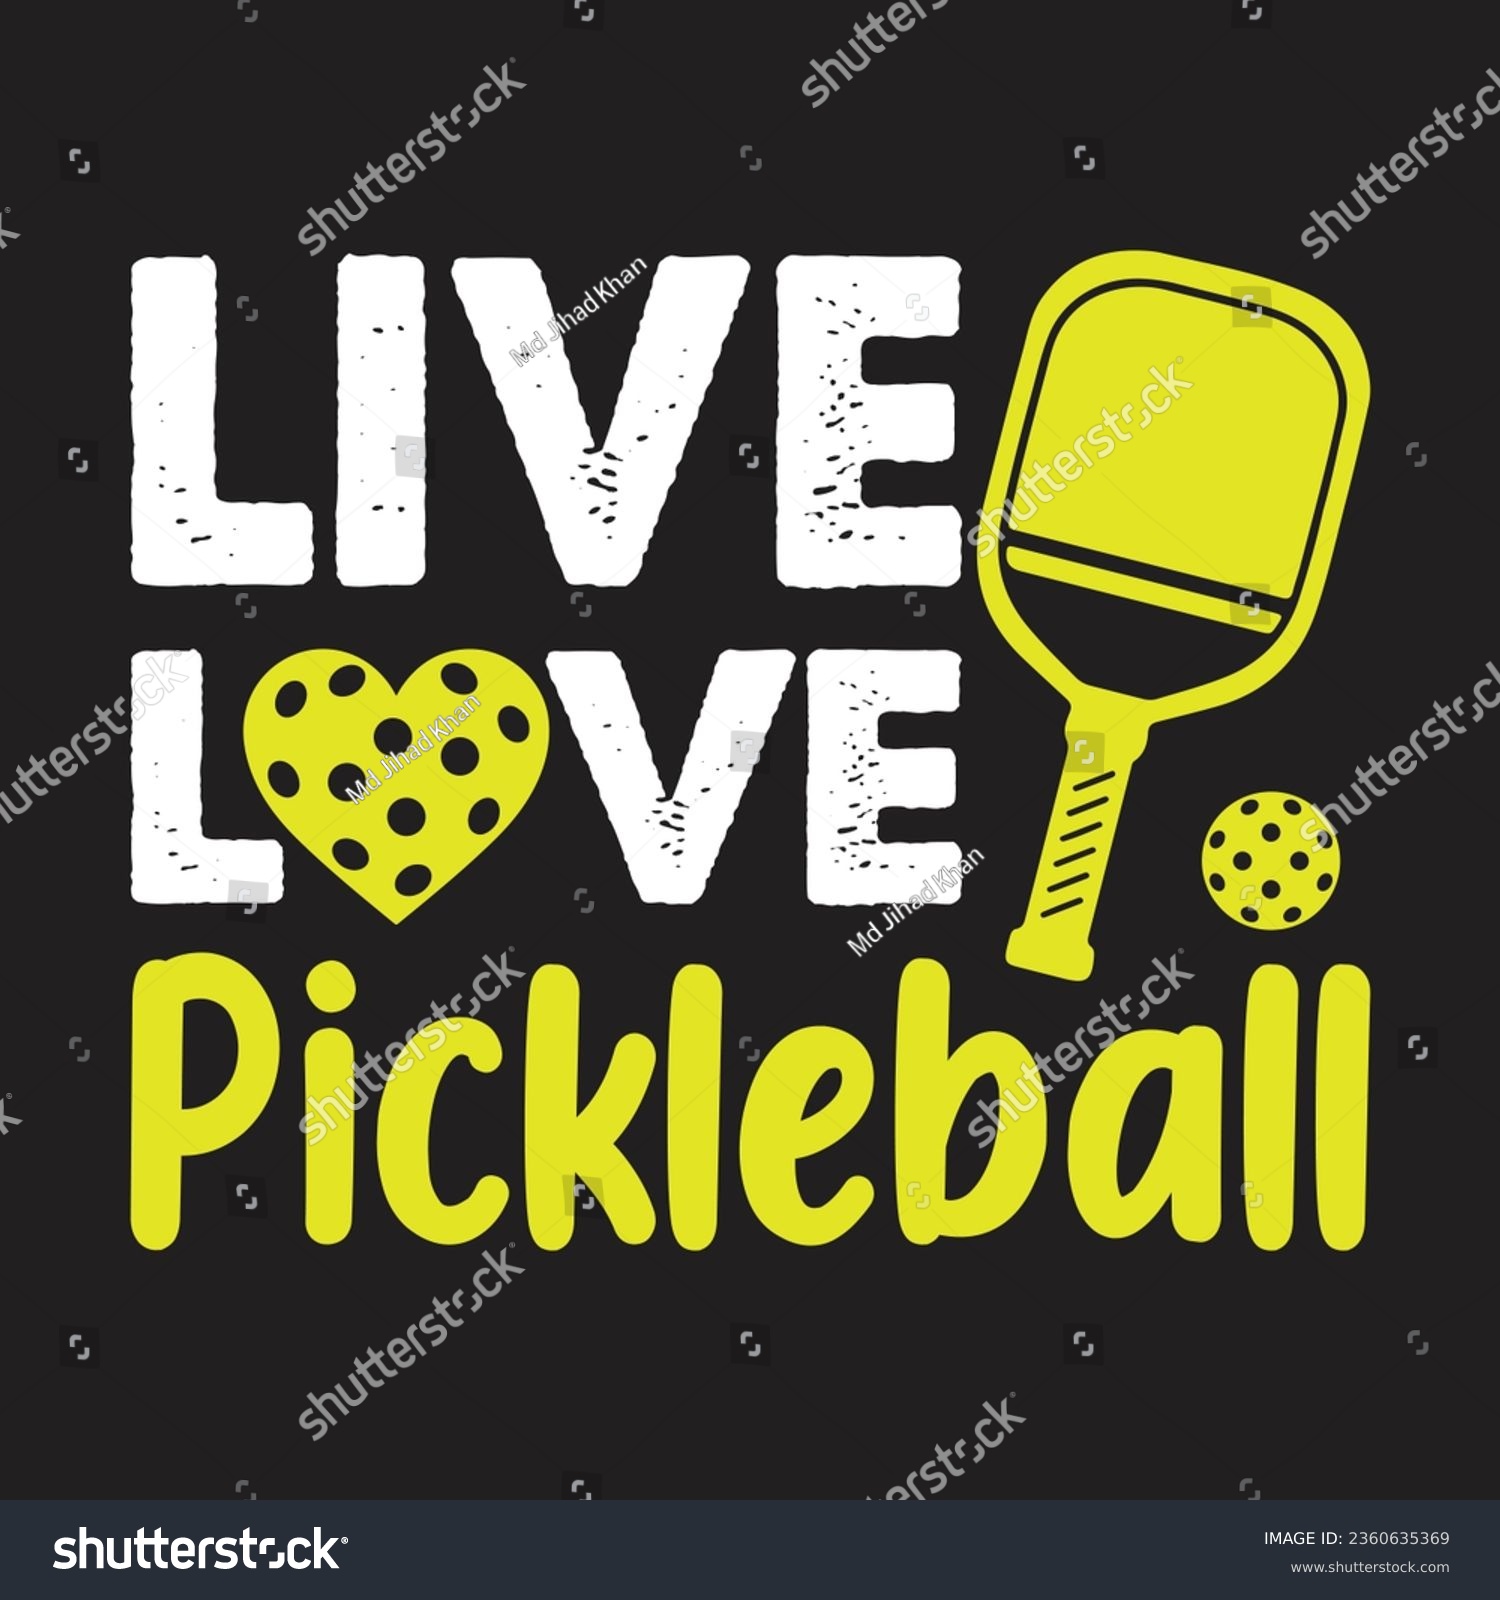 SVG of Live Love Pickleball. Pickball T-Shirt Design, Posters, Greeting Cards, Textiles, and Sticker Vector Illustration	
 svg